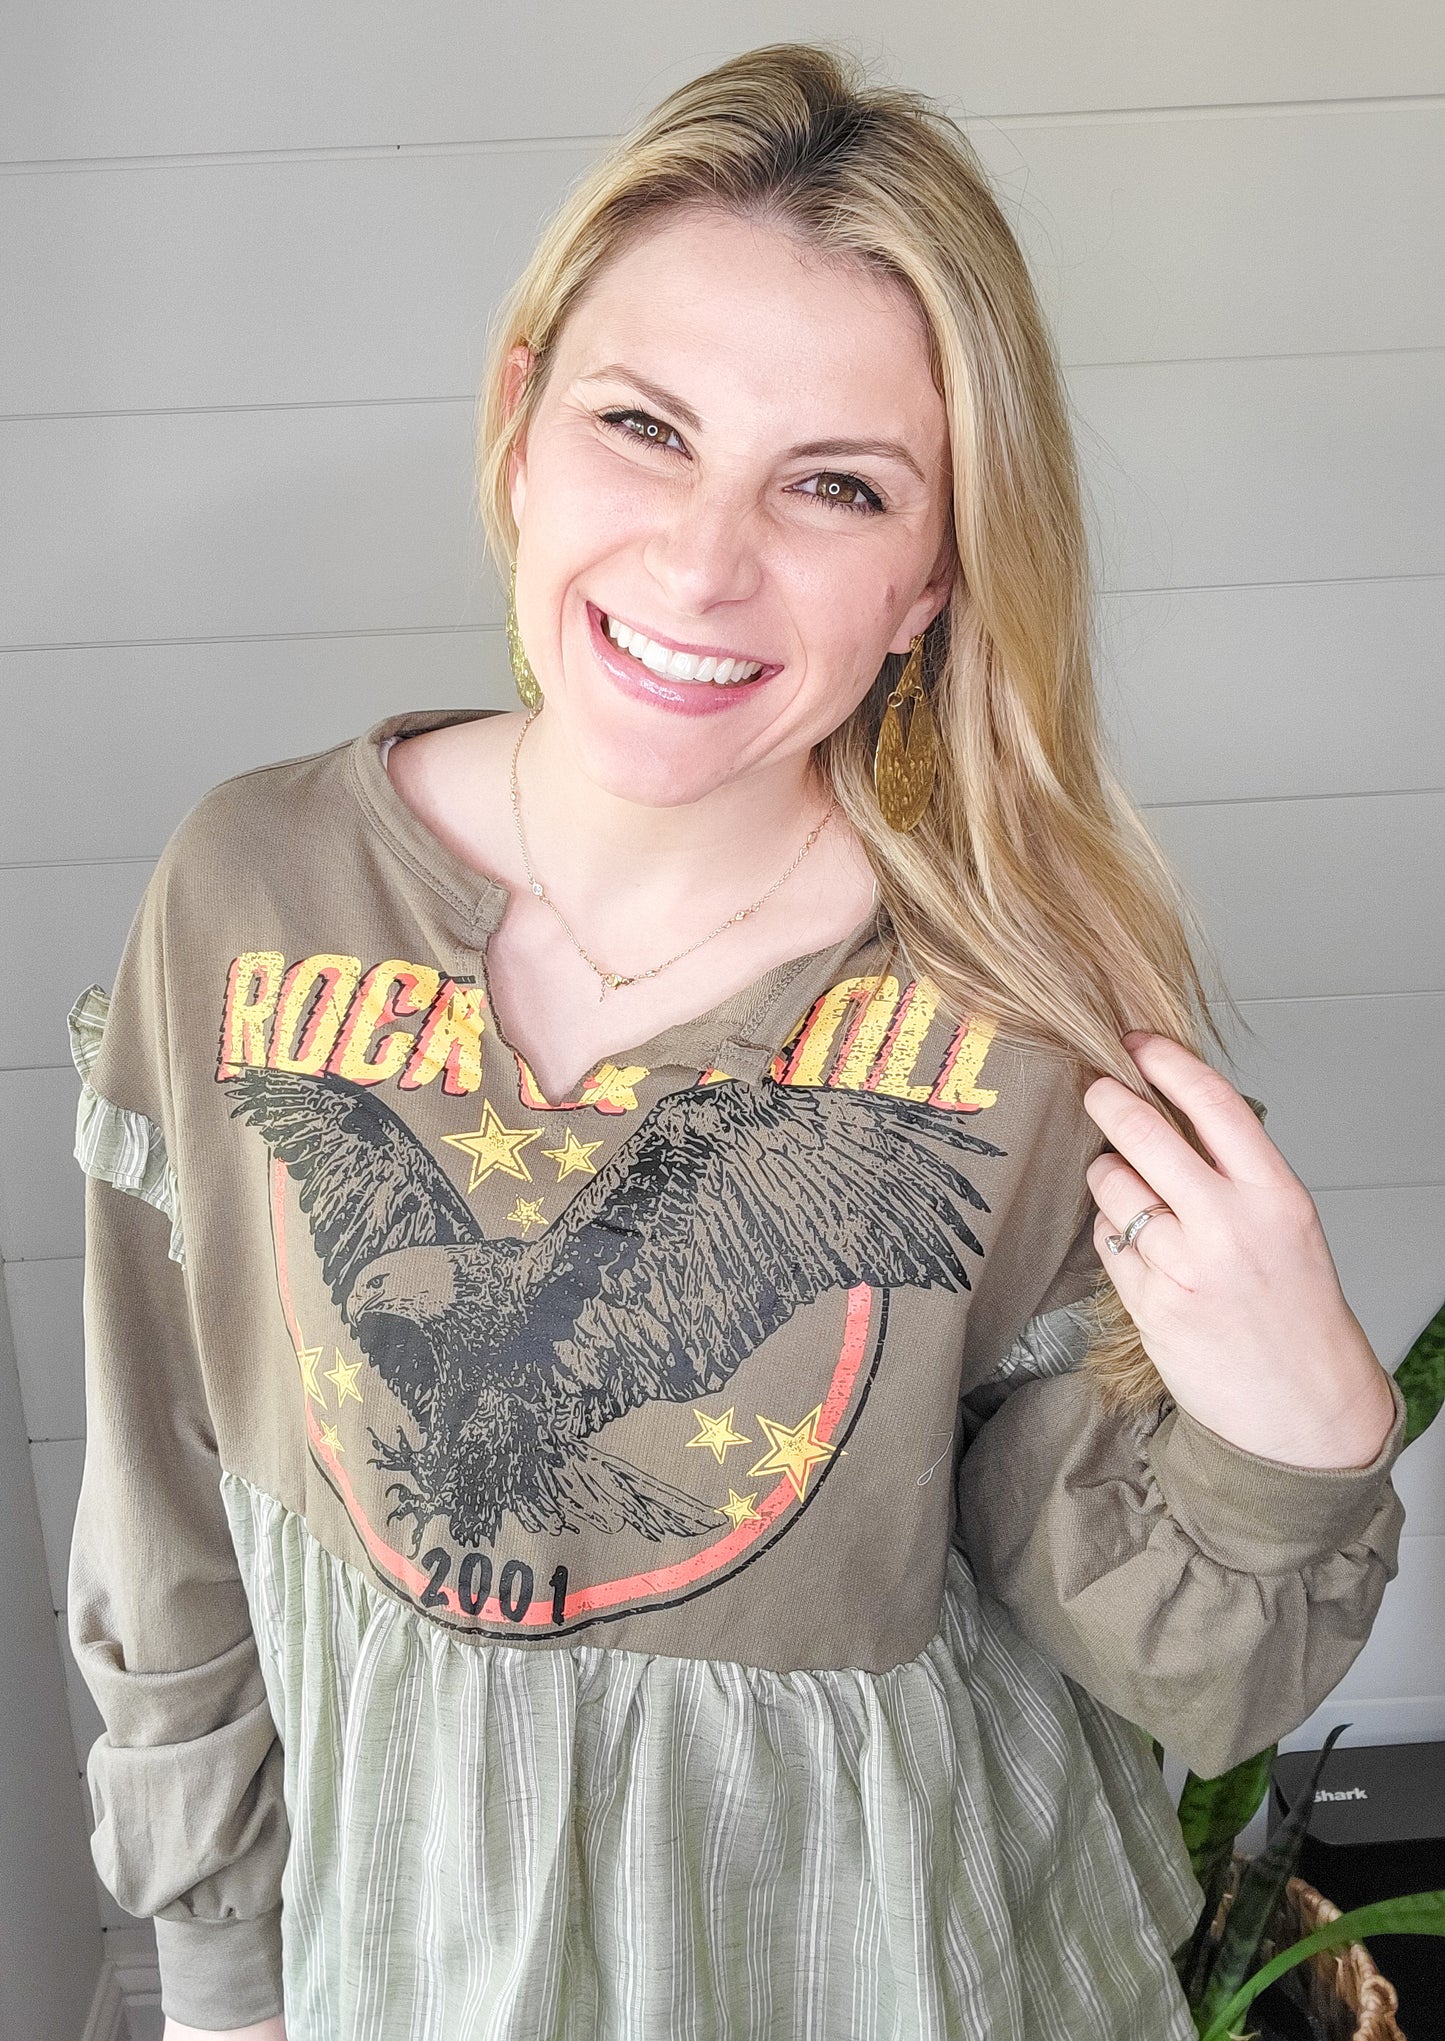 Rock-n-Roll Long Sleeve Top (Small to Large)